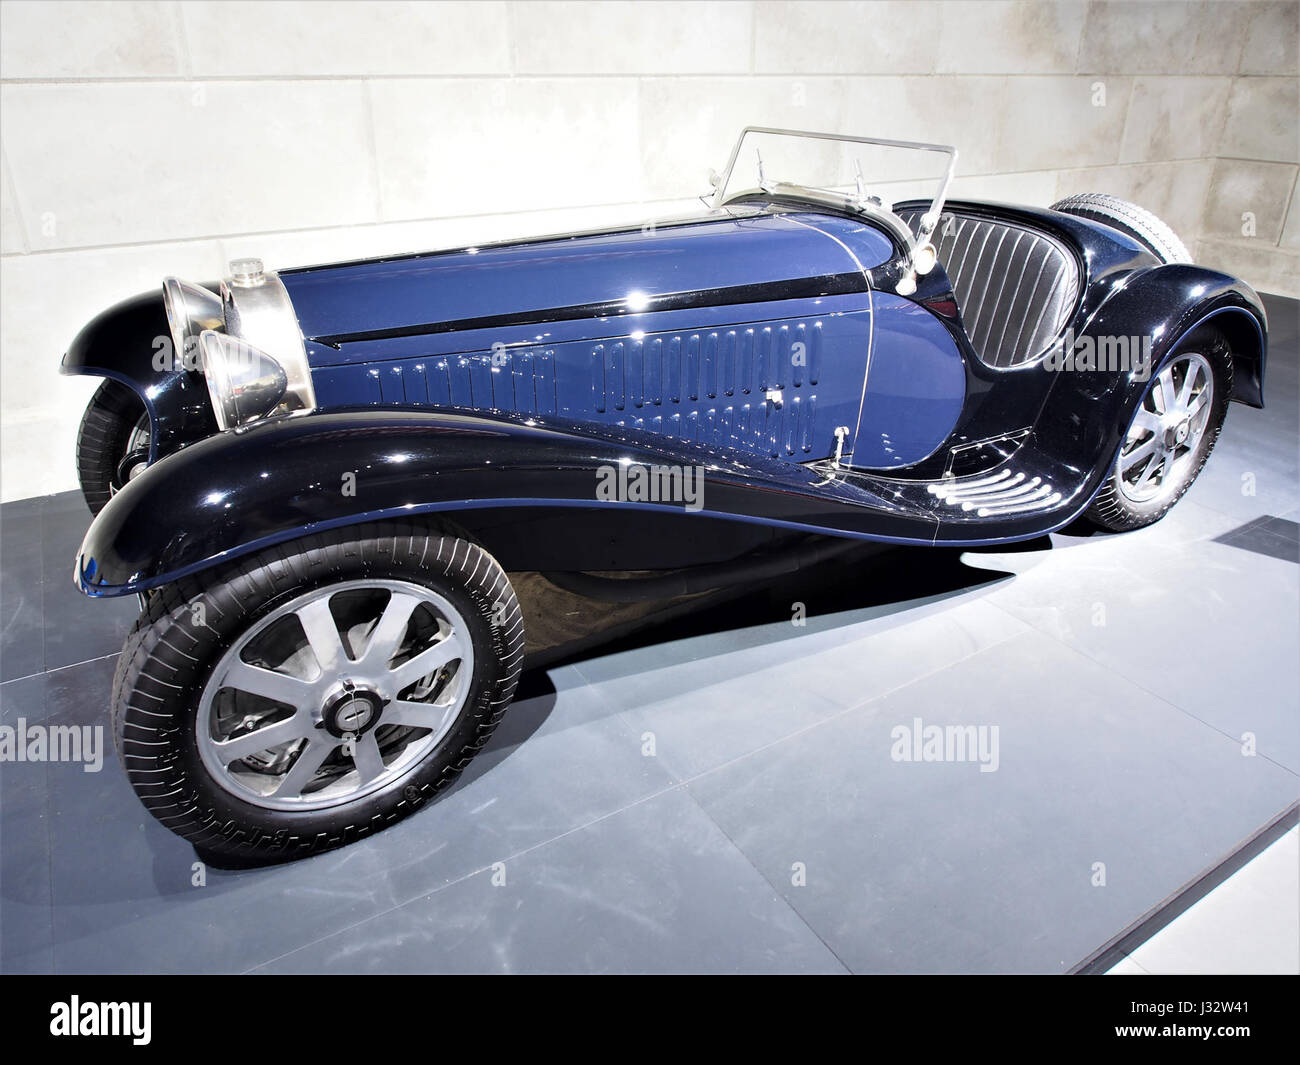 1932 Bugatti Type 54 Bachelier Roadster 5 litre 8 cylinder supercharged  300hp pic6 Stock Photo - Alamy